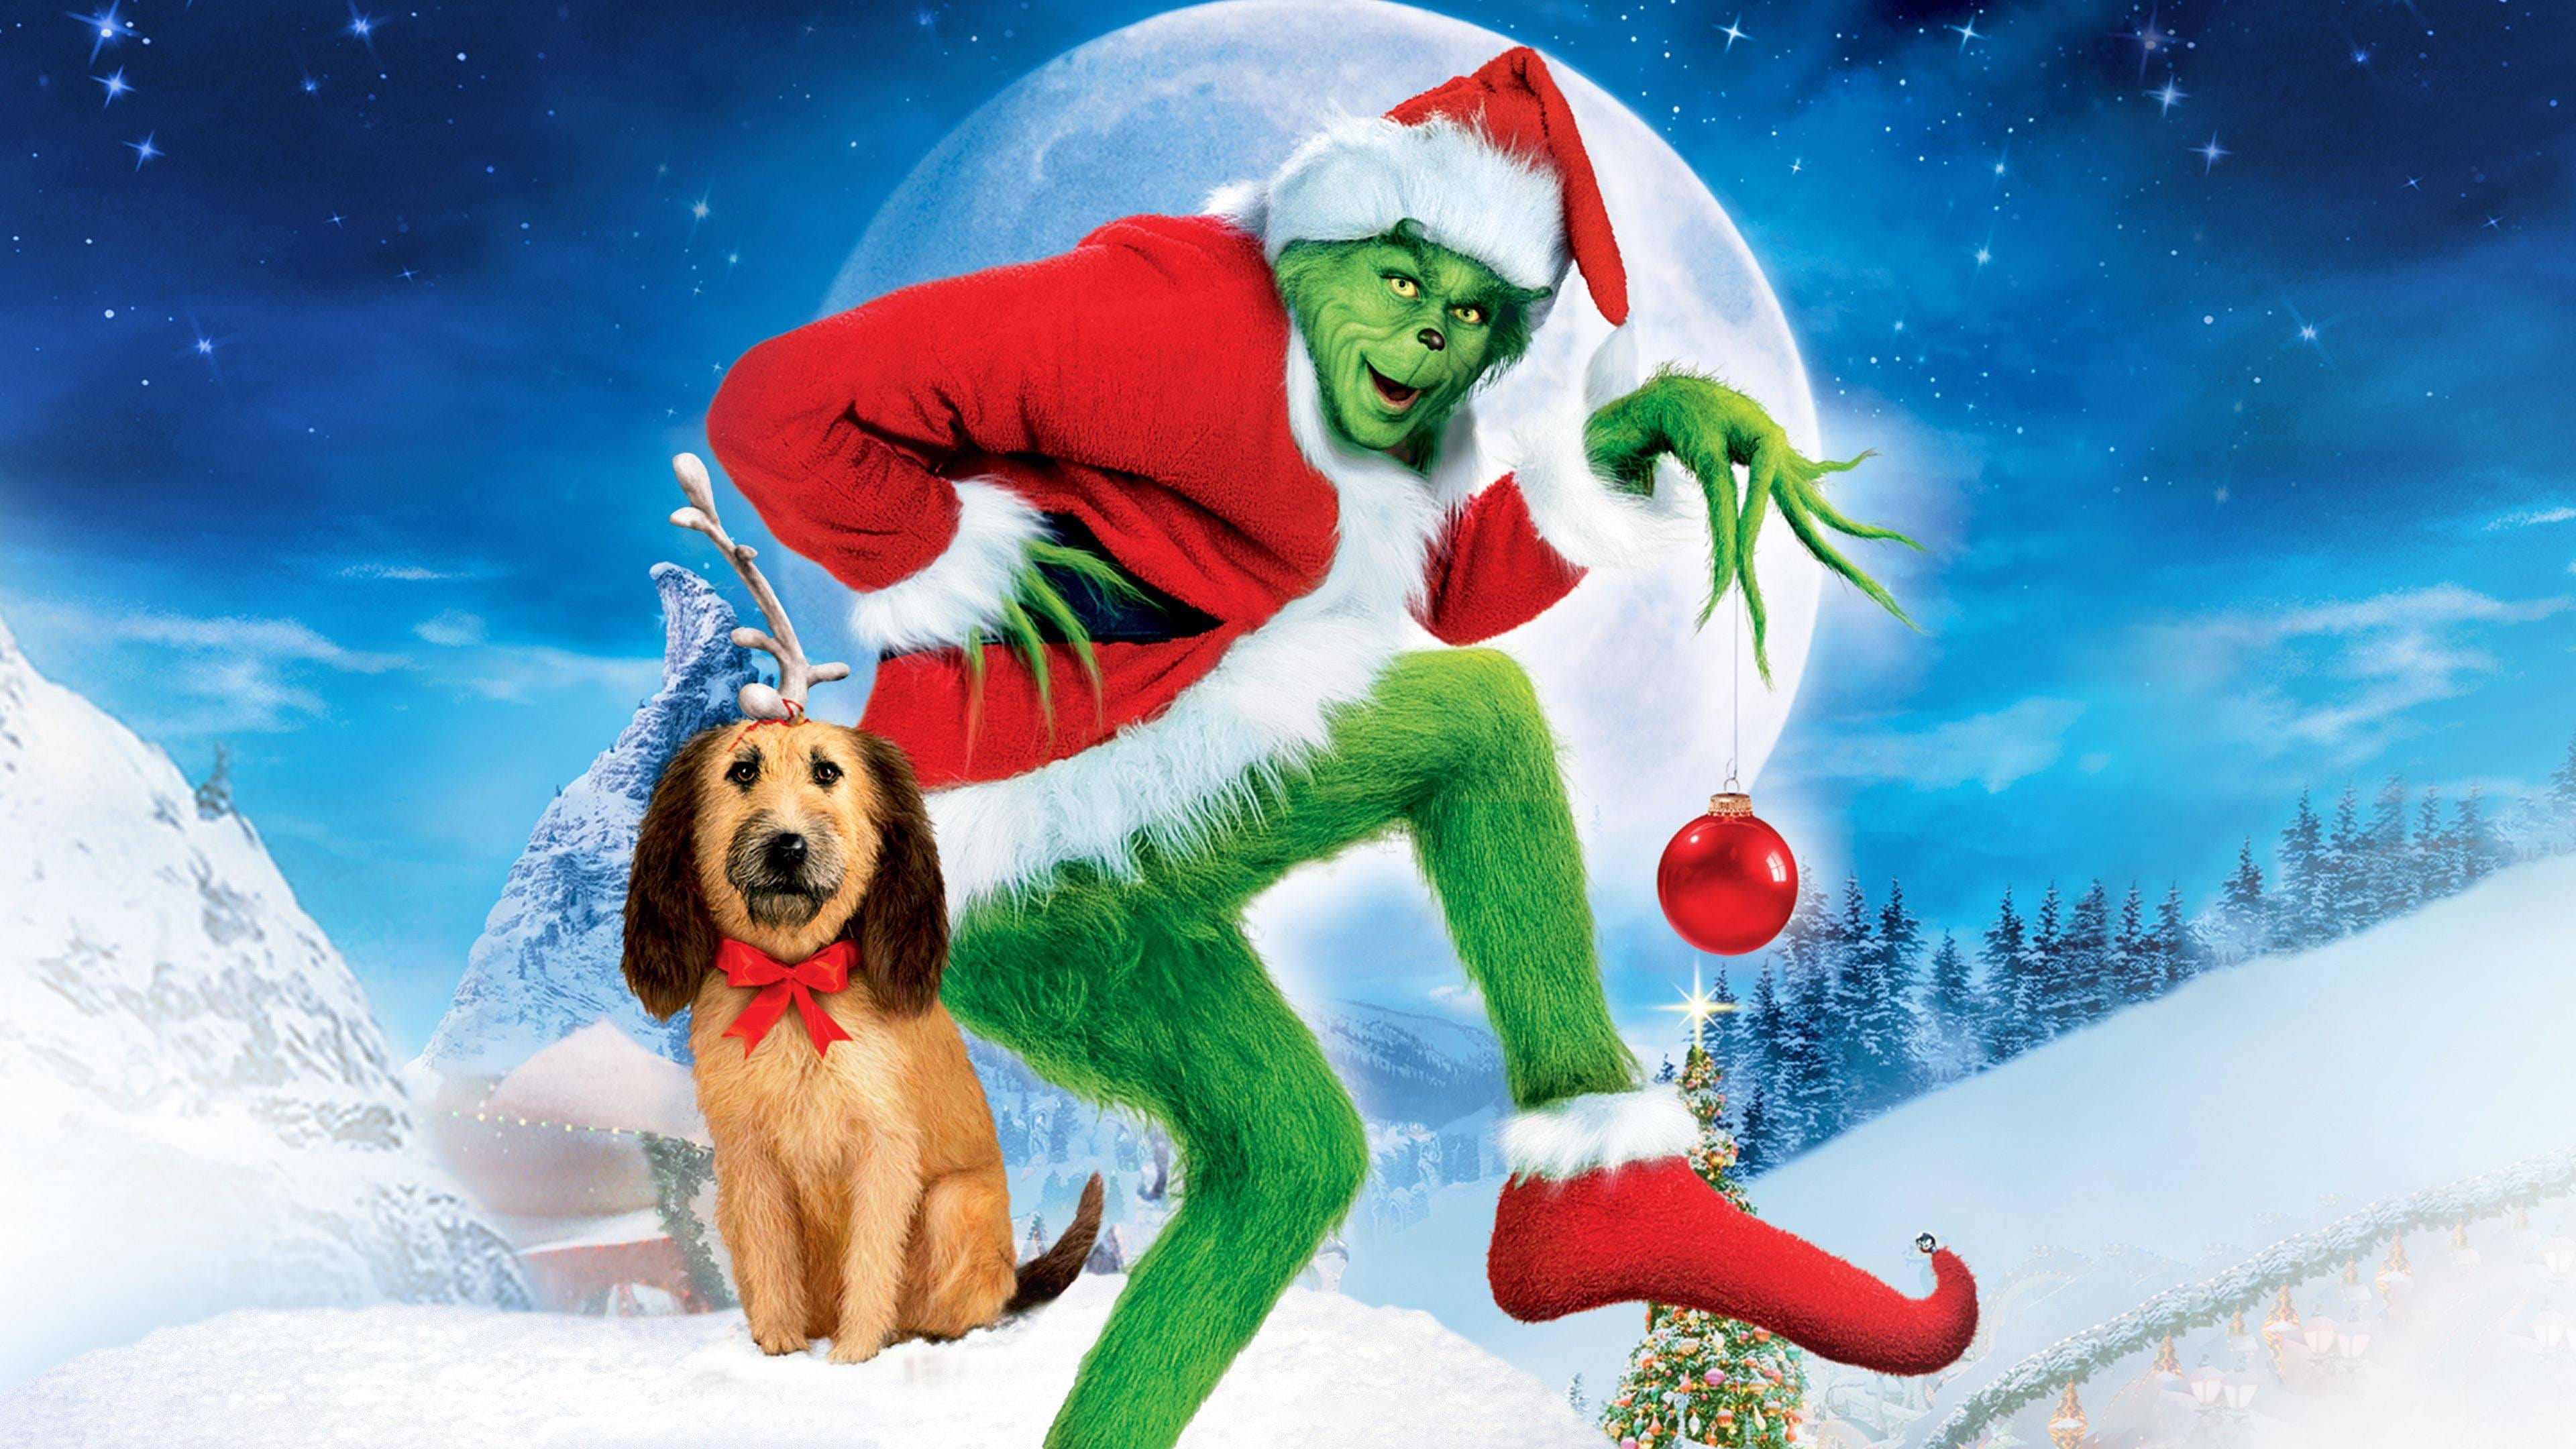 How the Grinch Stole Christmas 2000 Soap2Day